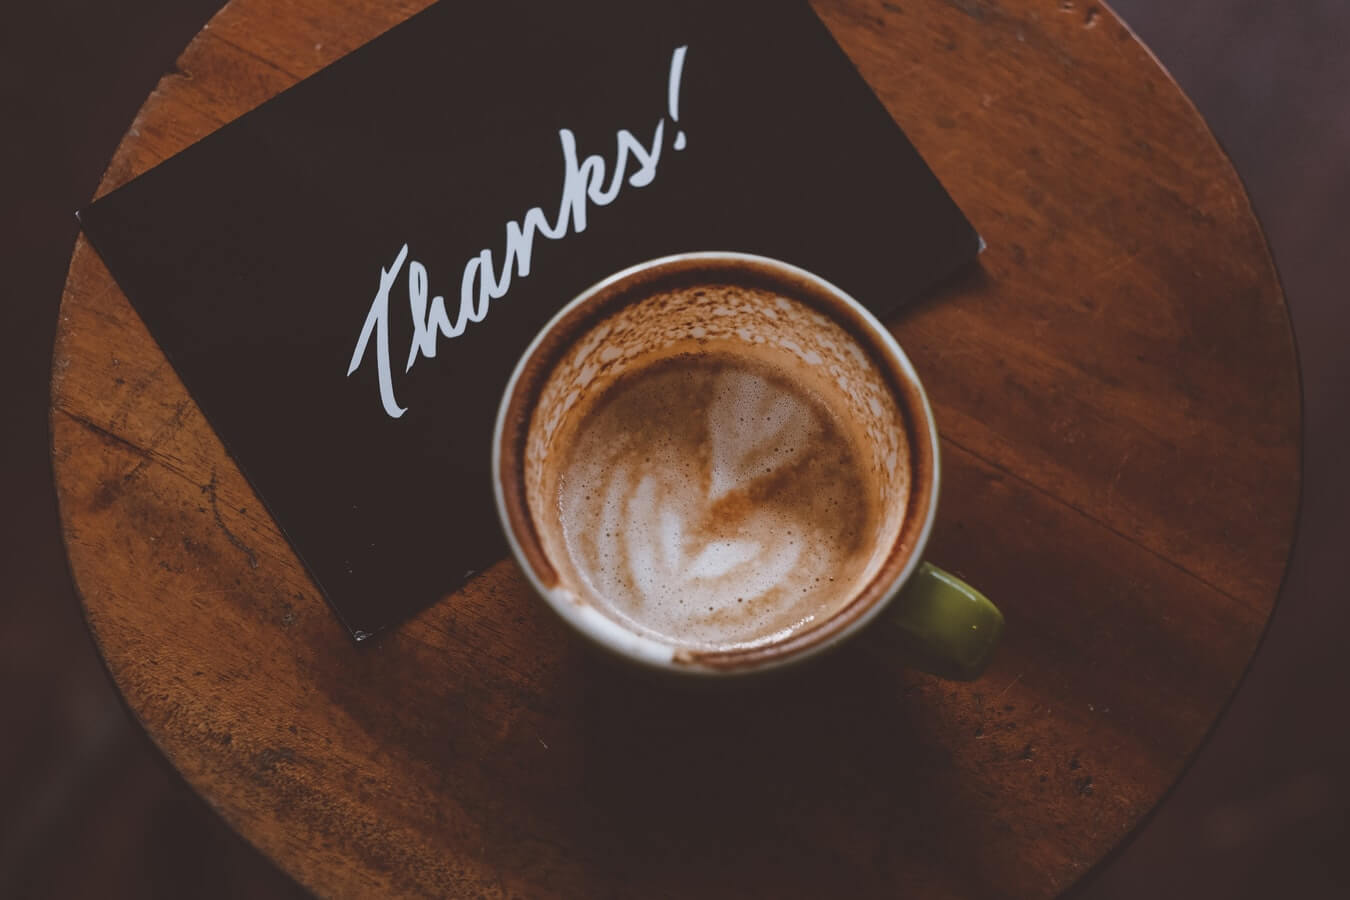 thank you note and coffee